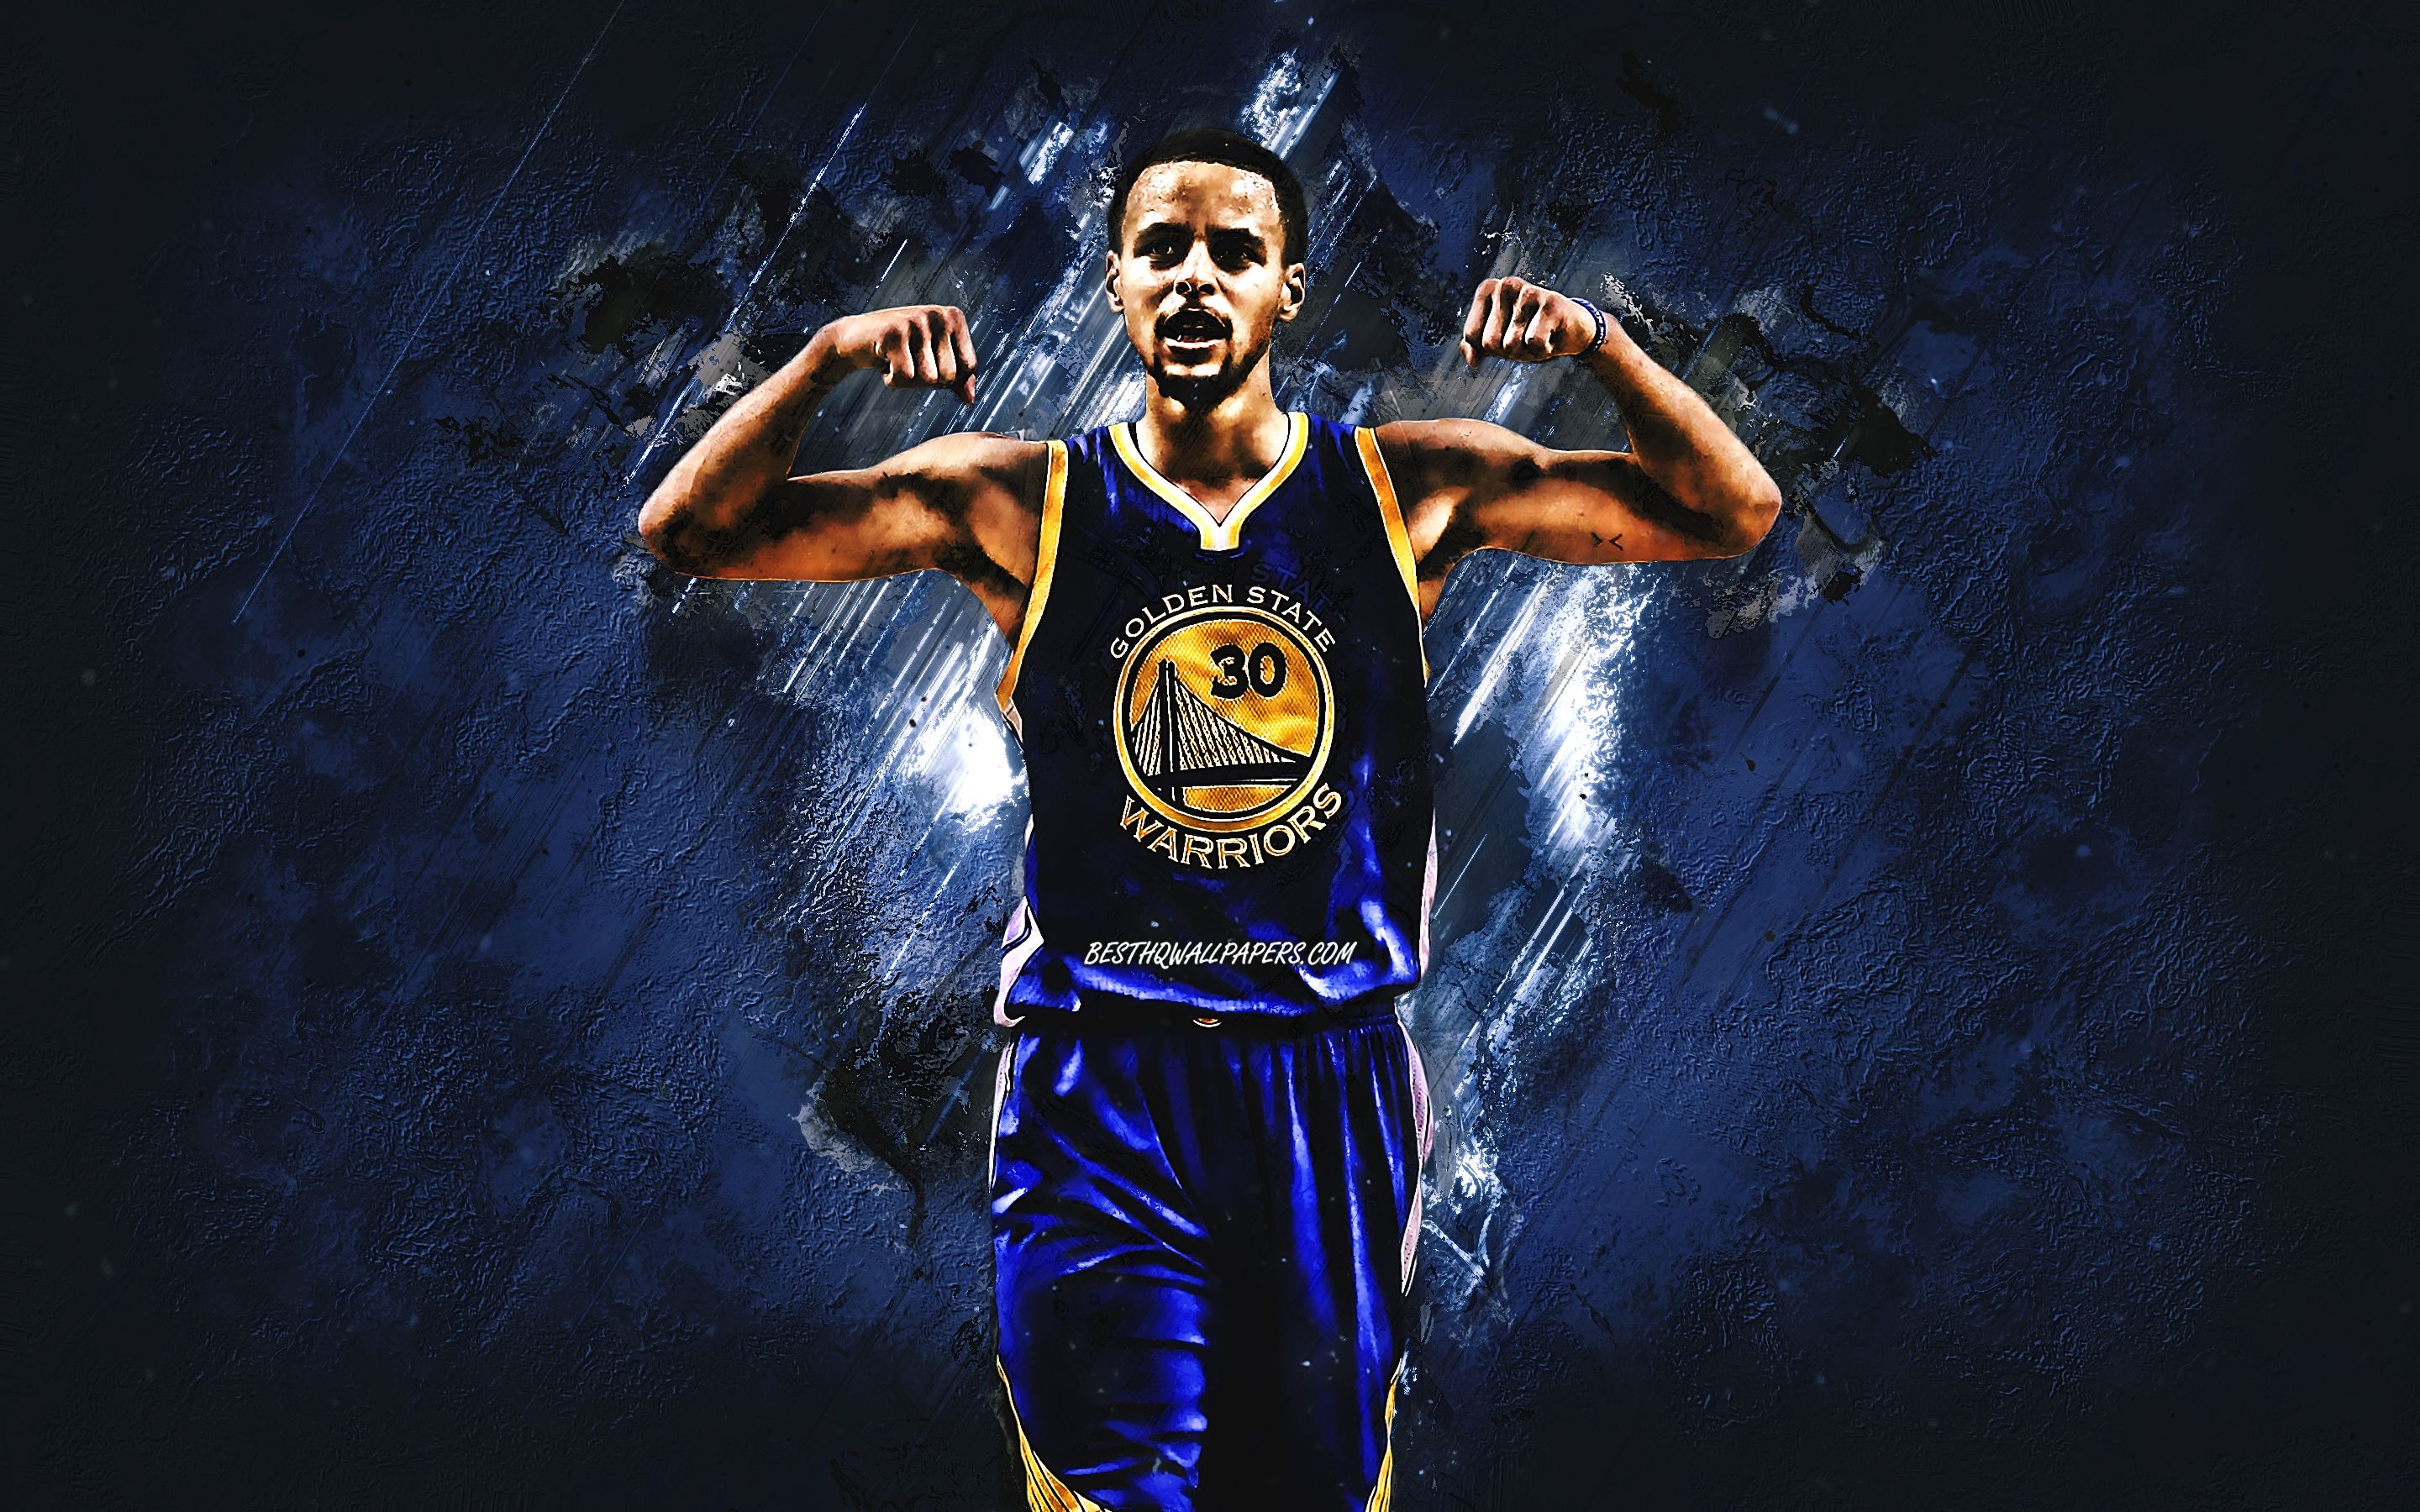 2023 Stephen Curry Wallpapers - Wallpaper Cave